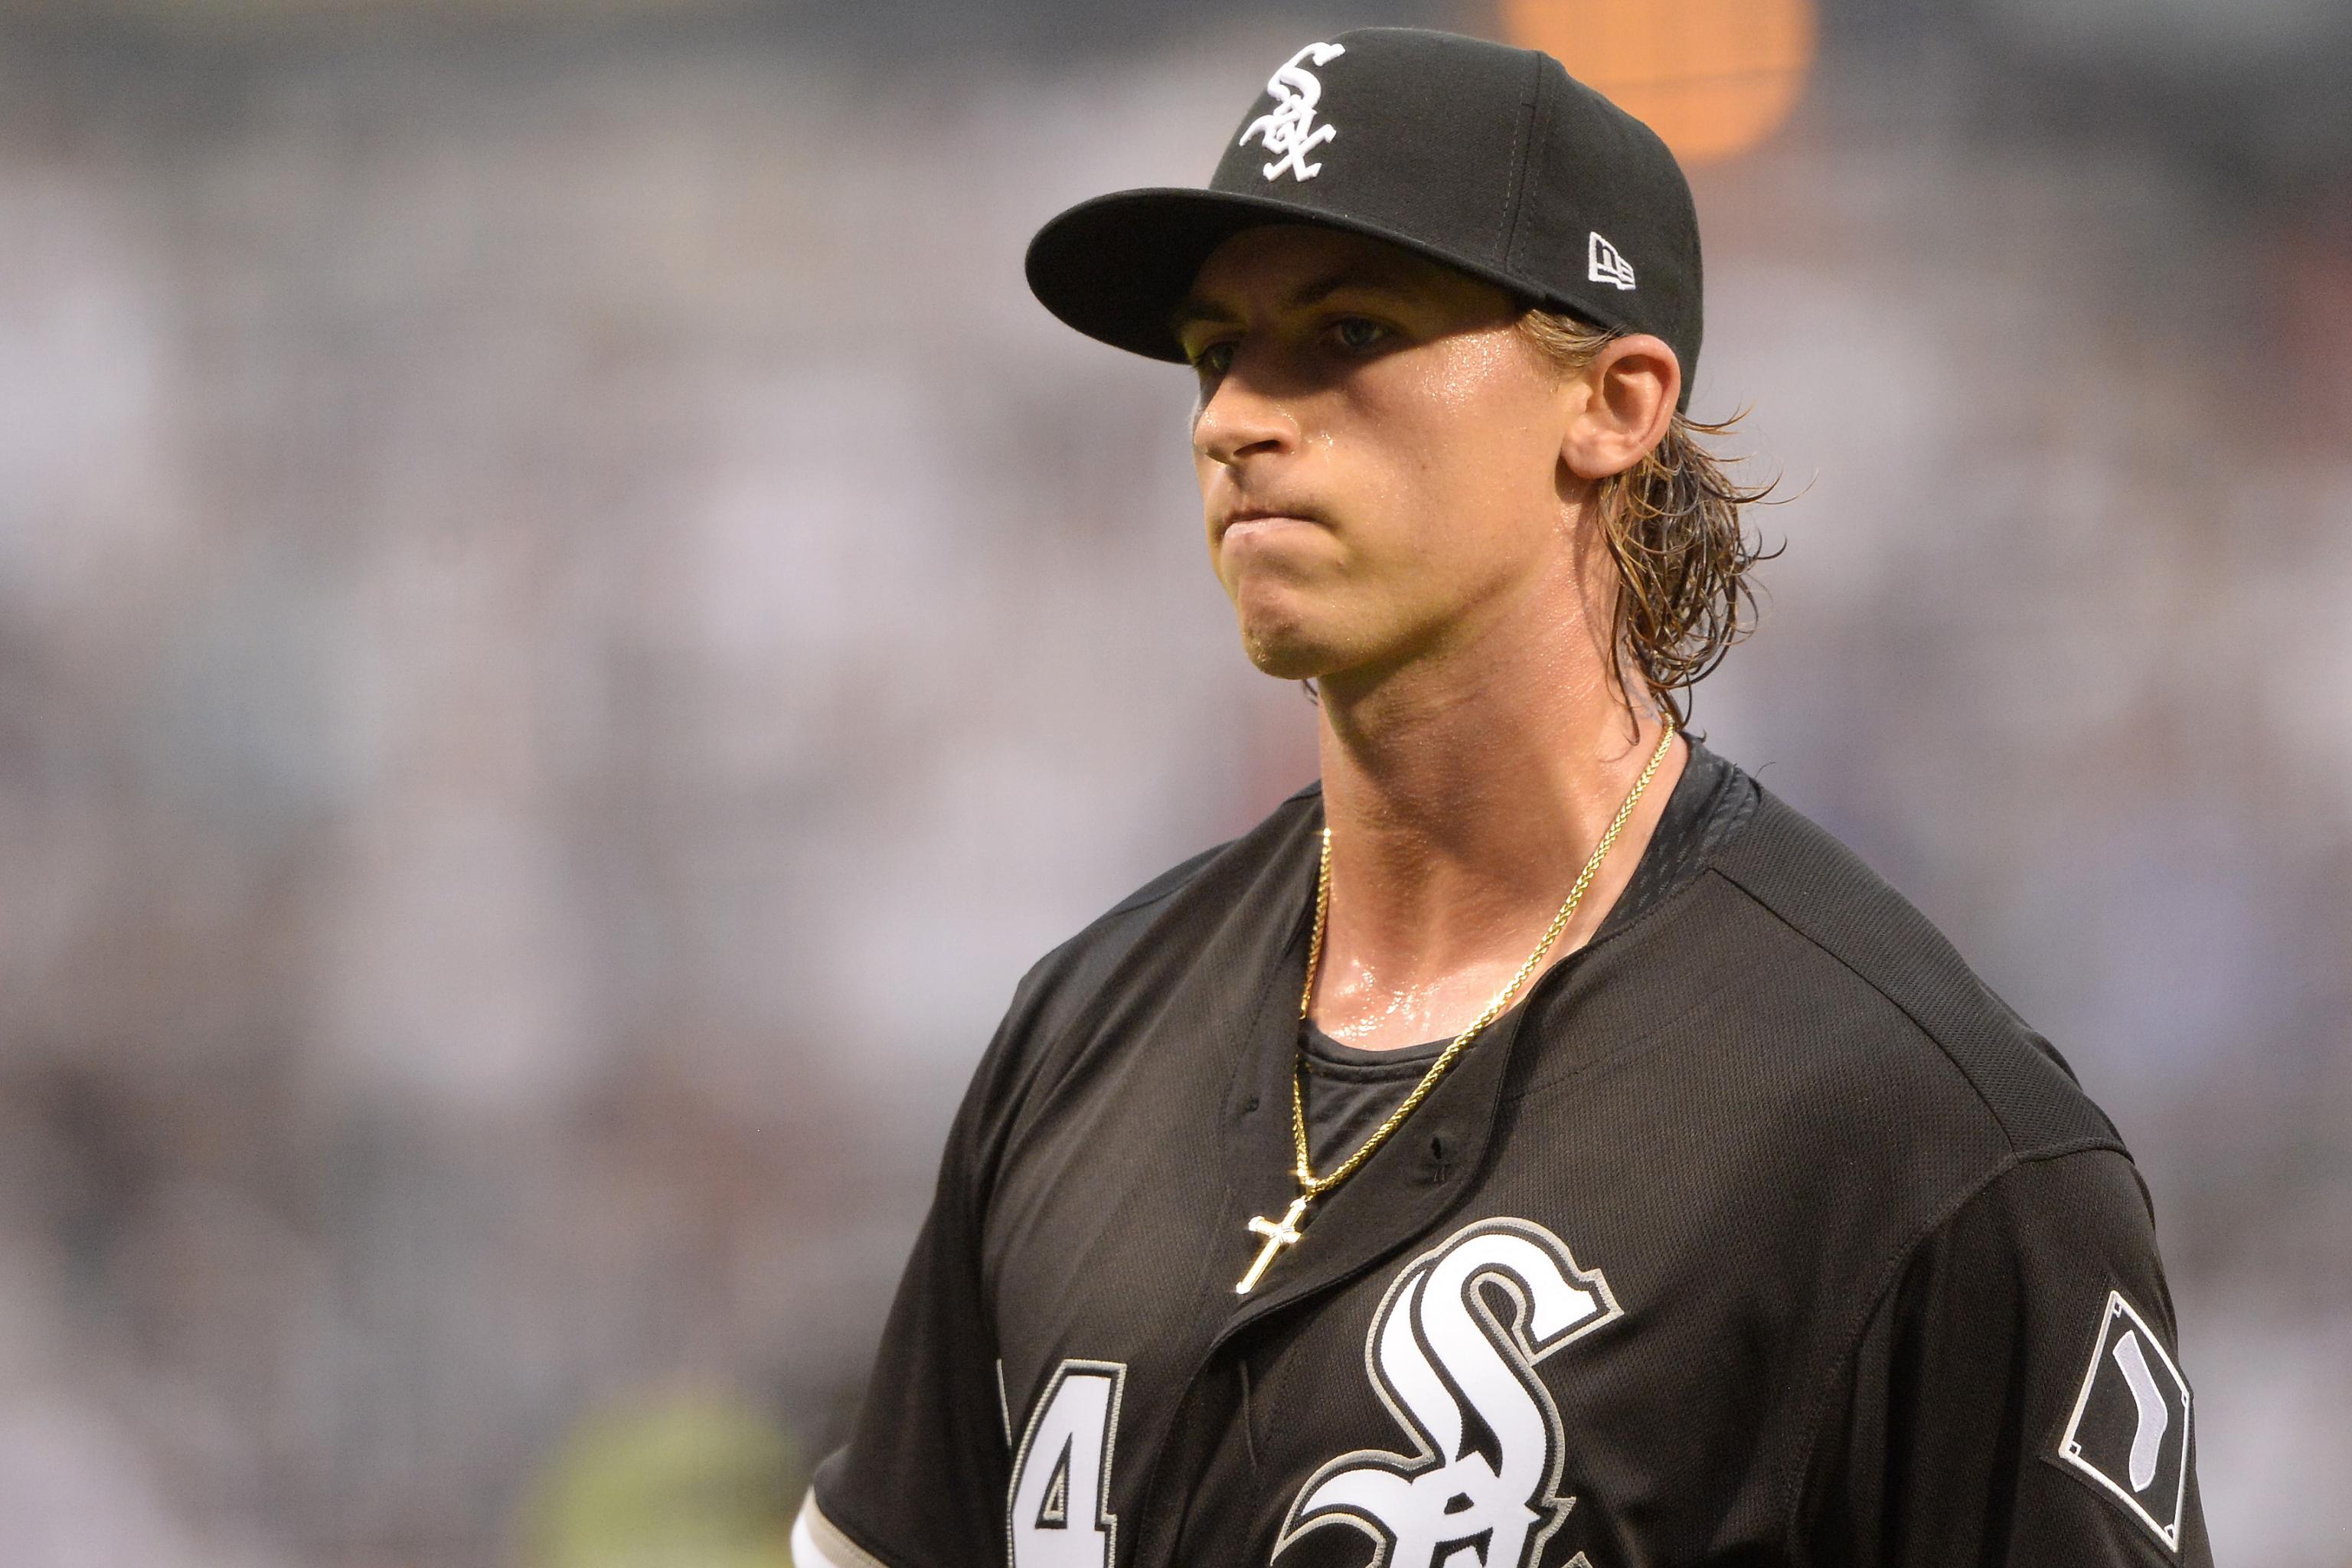 There's a new star in town and she's with Michael Kopech - The Athletic